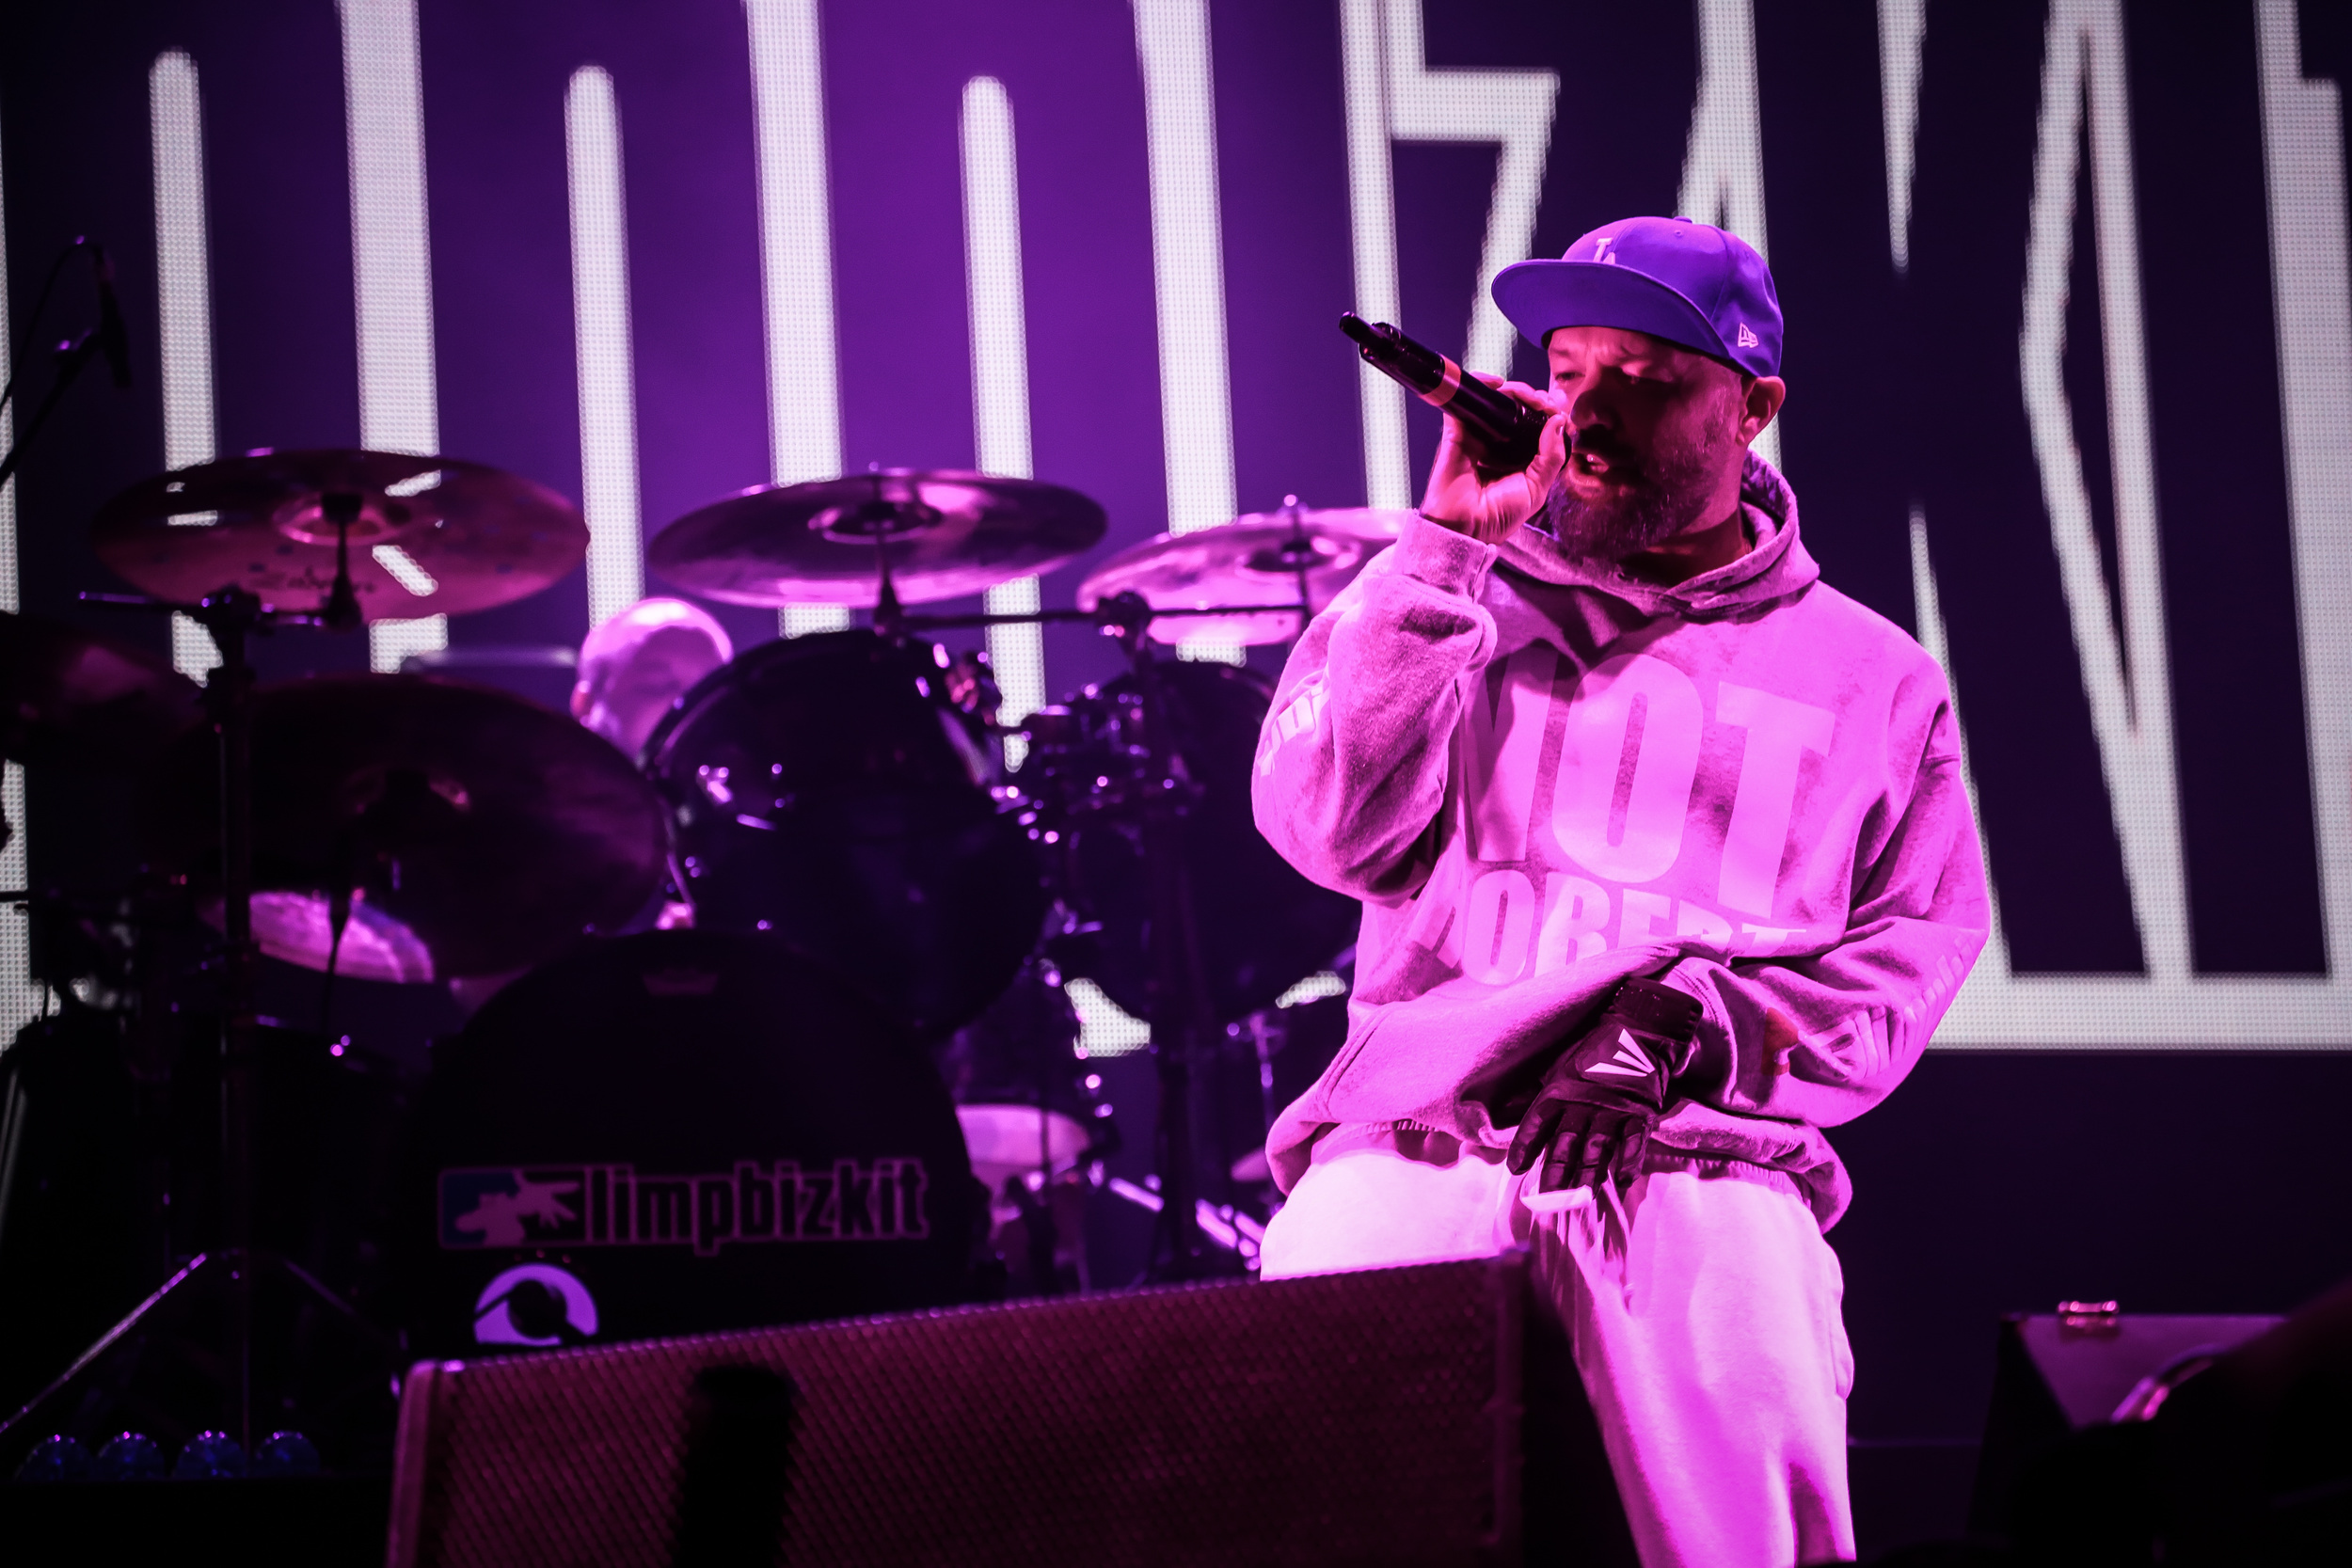 <p>In the sludgy, dreary days of early rap-rock and nu-metal in the late '90s, Limp Bizkit stood out, initially for its bro-rock laments but even more explicitly for a unique sense of humor, as not many bands could release a cover of George Michael's "Faith" as a single and turn it into a hit. So for Limp Bizkit's sophomore album, the band hit the bullseye, capturing what everyone loved and everyone hated about the subgenre in one fell swoop. There was no entry level to clear: You knew the hooks and riffs to songs like "Nookie" and "Break Stuff" instantly, and album tracks like "Nobody Like You" and "I'm Broke" told you everything you needed to know about them within the first 10 seconds. Catchy on first listen and built with remarkable staying power, the Bizkit even flashed instances of genuine artistry, like on the powerful classic "Re-Arranged." Since then? The group simply became a parody of itself, losing and then regaining guitarist Wes Borland, as the band kept releasing music to fans who still have fond memories of the Family Values Tours of yore.</p><p>You may also like: <a href='https://www.yardbarker.com/entertainment/articles/20_facts_you_might_not_know_about_the_shining_012324/s1__35322359'>20 facts you might not know about 'The Shining'</a></p>